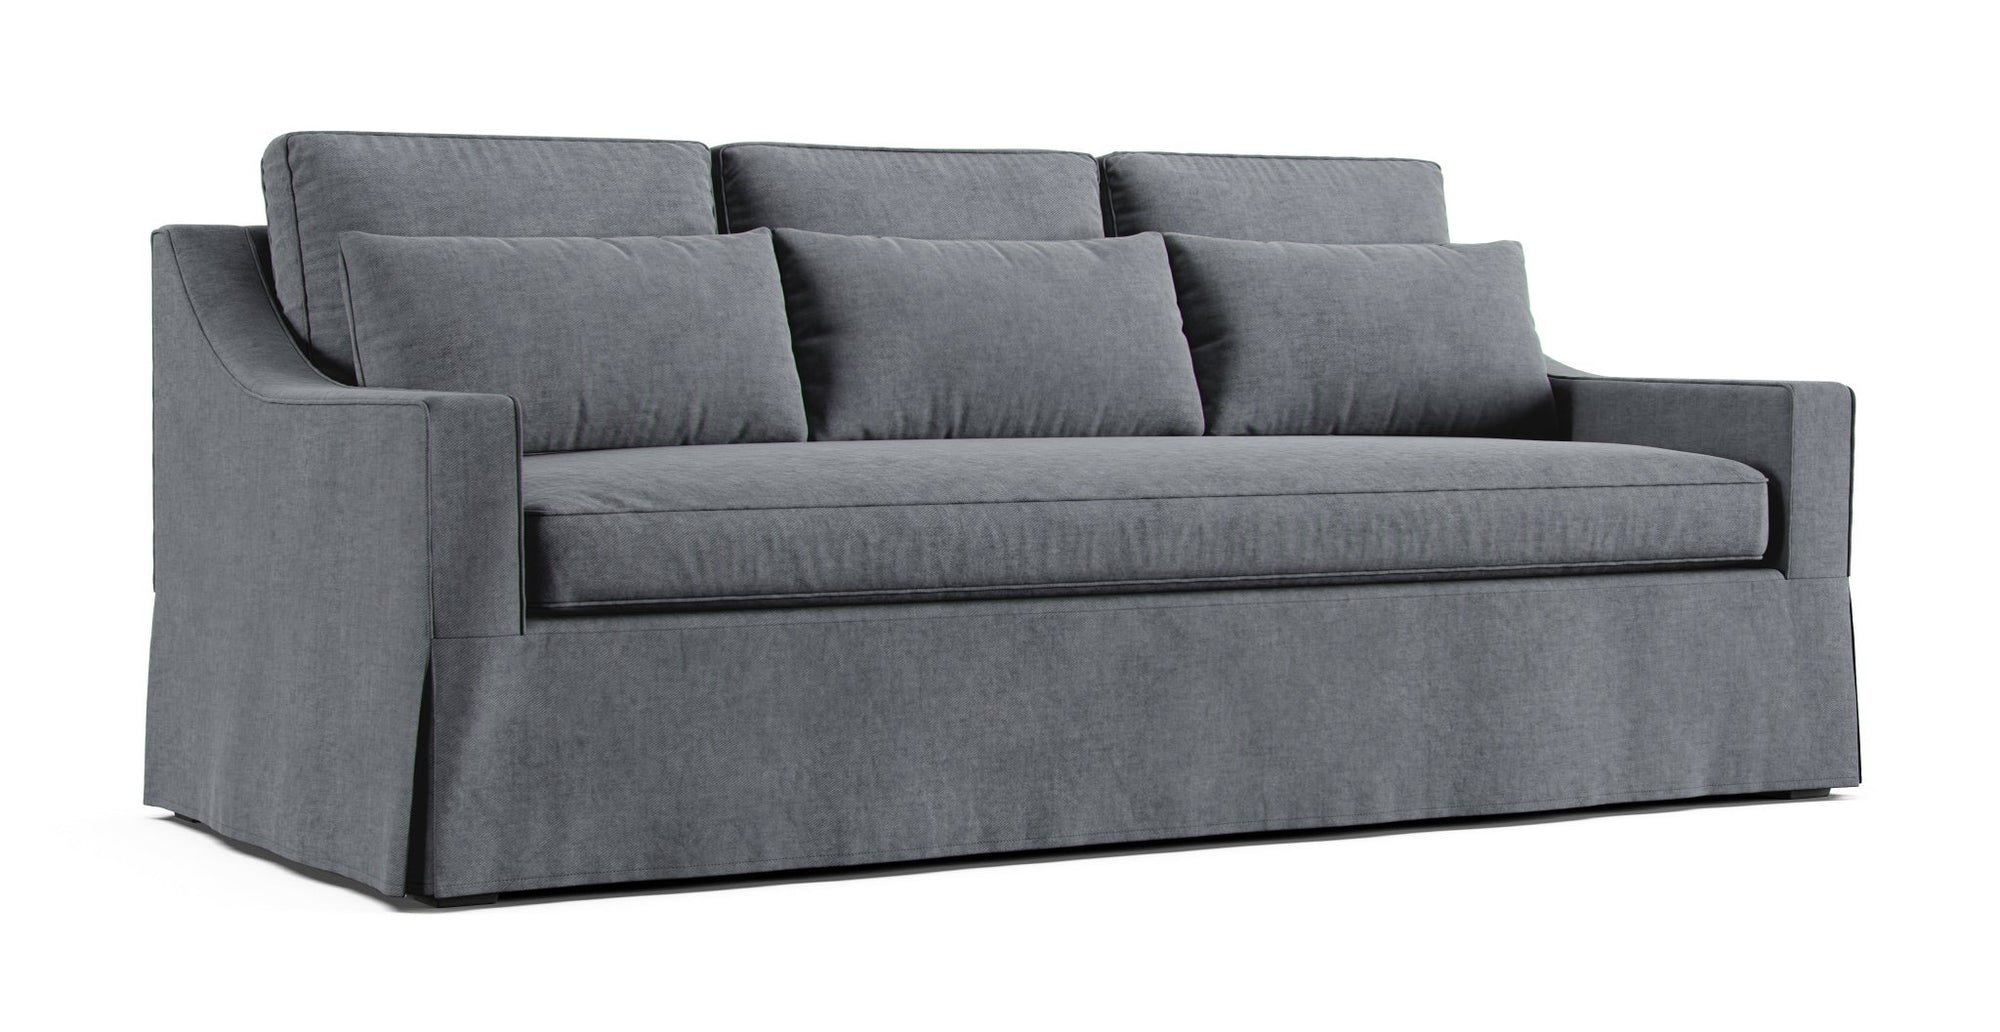 Pottery Barn York Slope Arm Deep Seat Grand sofa featuring Brushed Cotton Coal slipcover